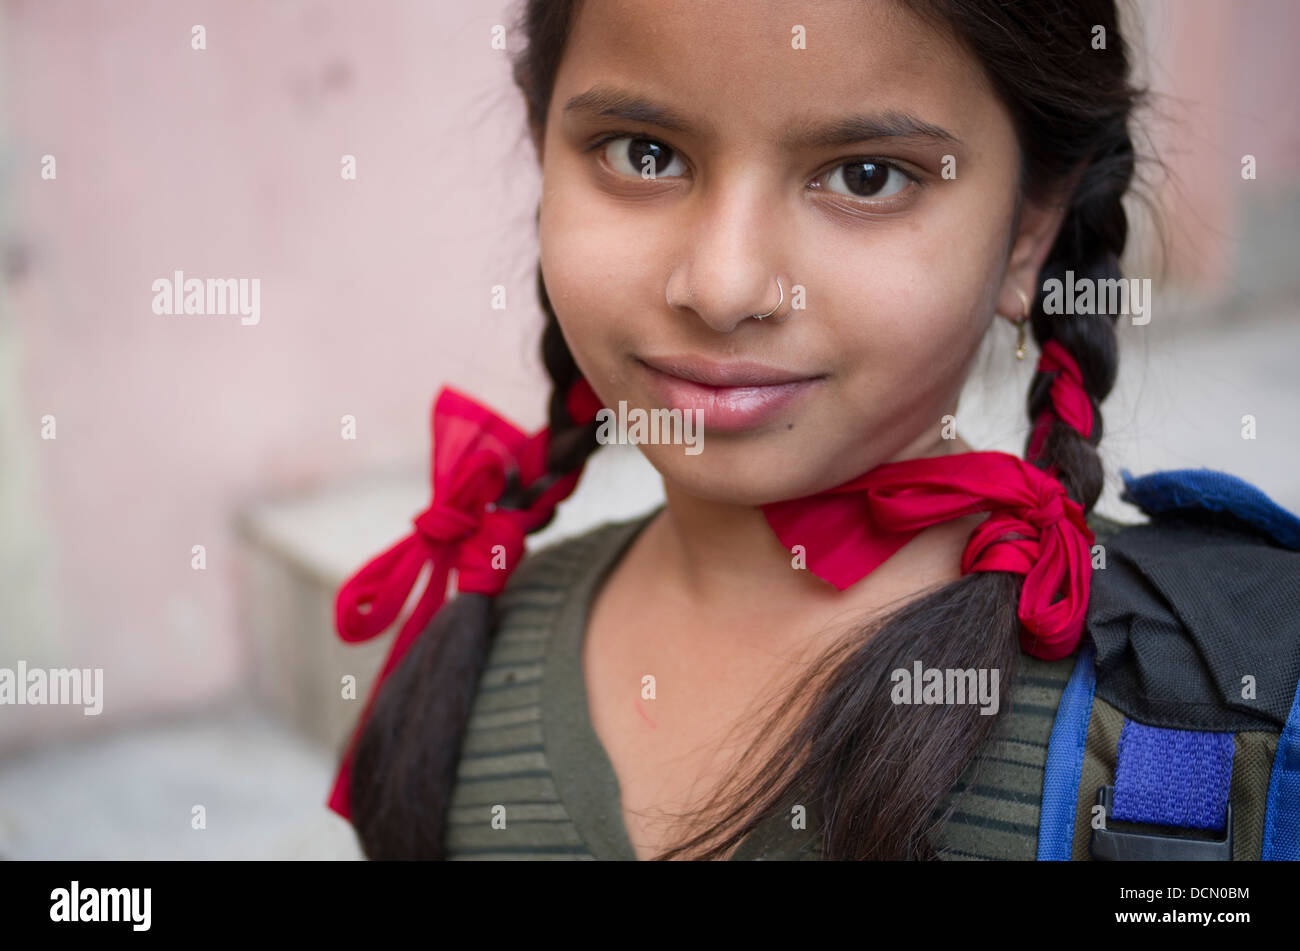 Young Indian School Girl with braids - Jodhpur, Rajasthan, India Stock Photo